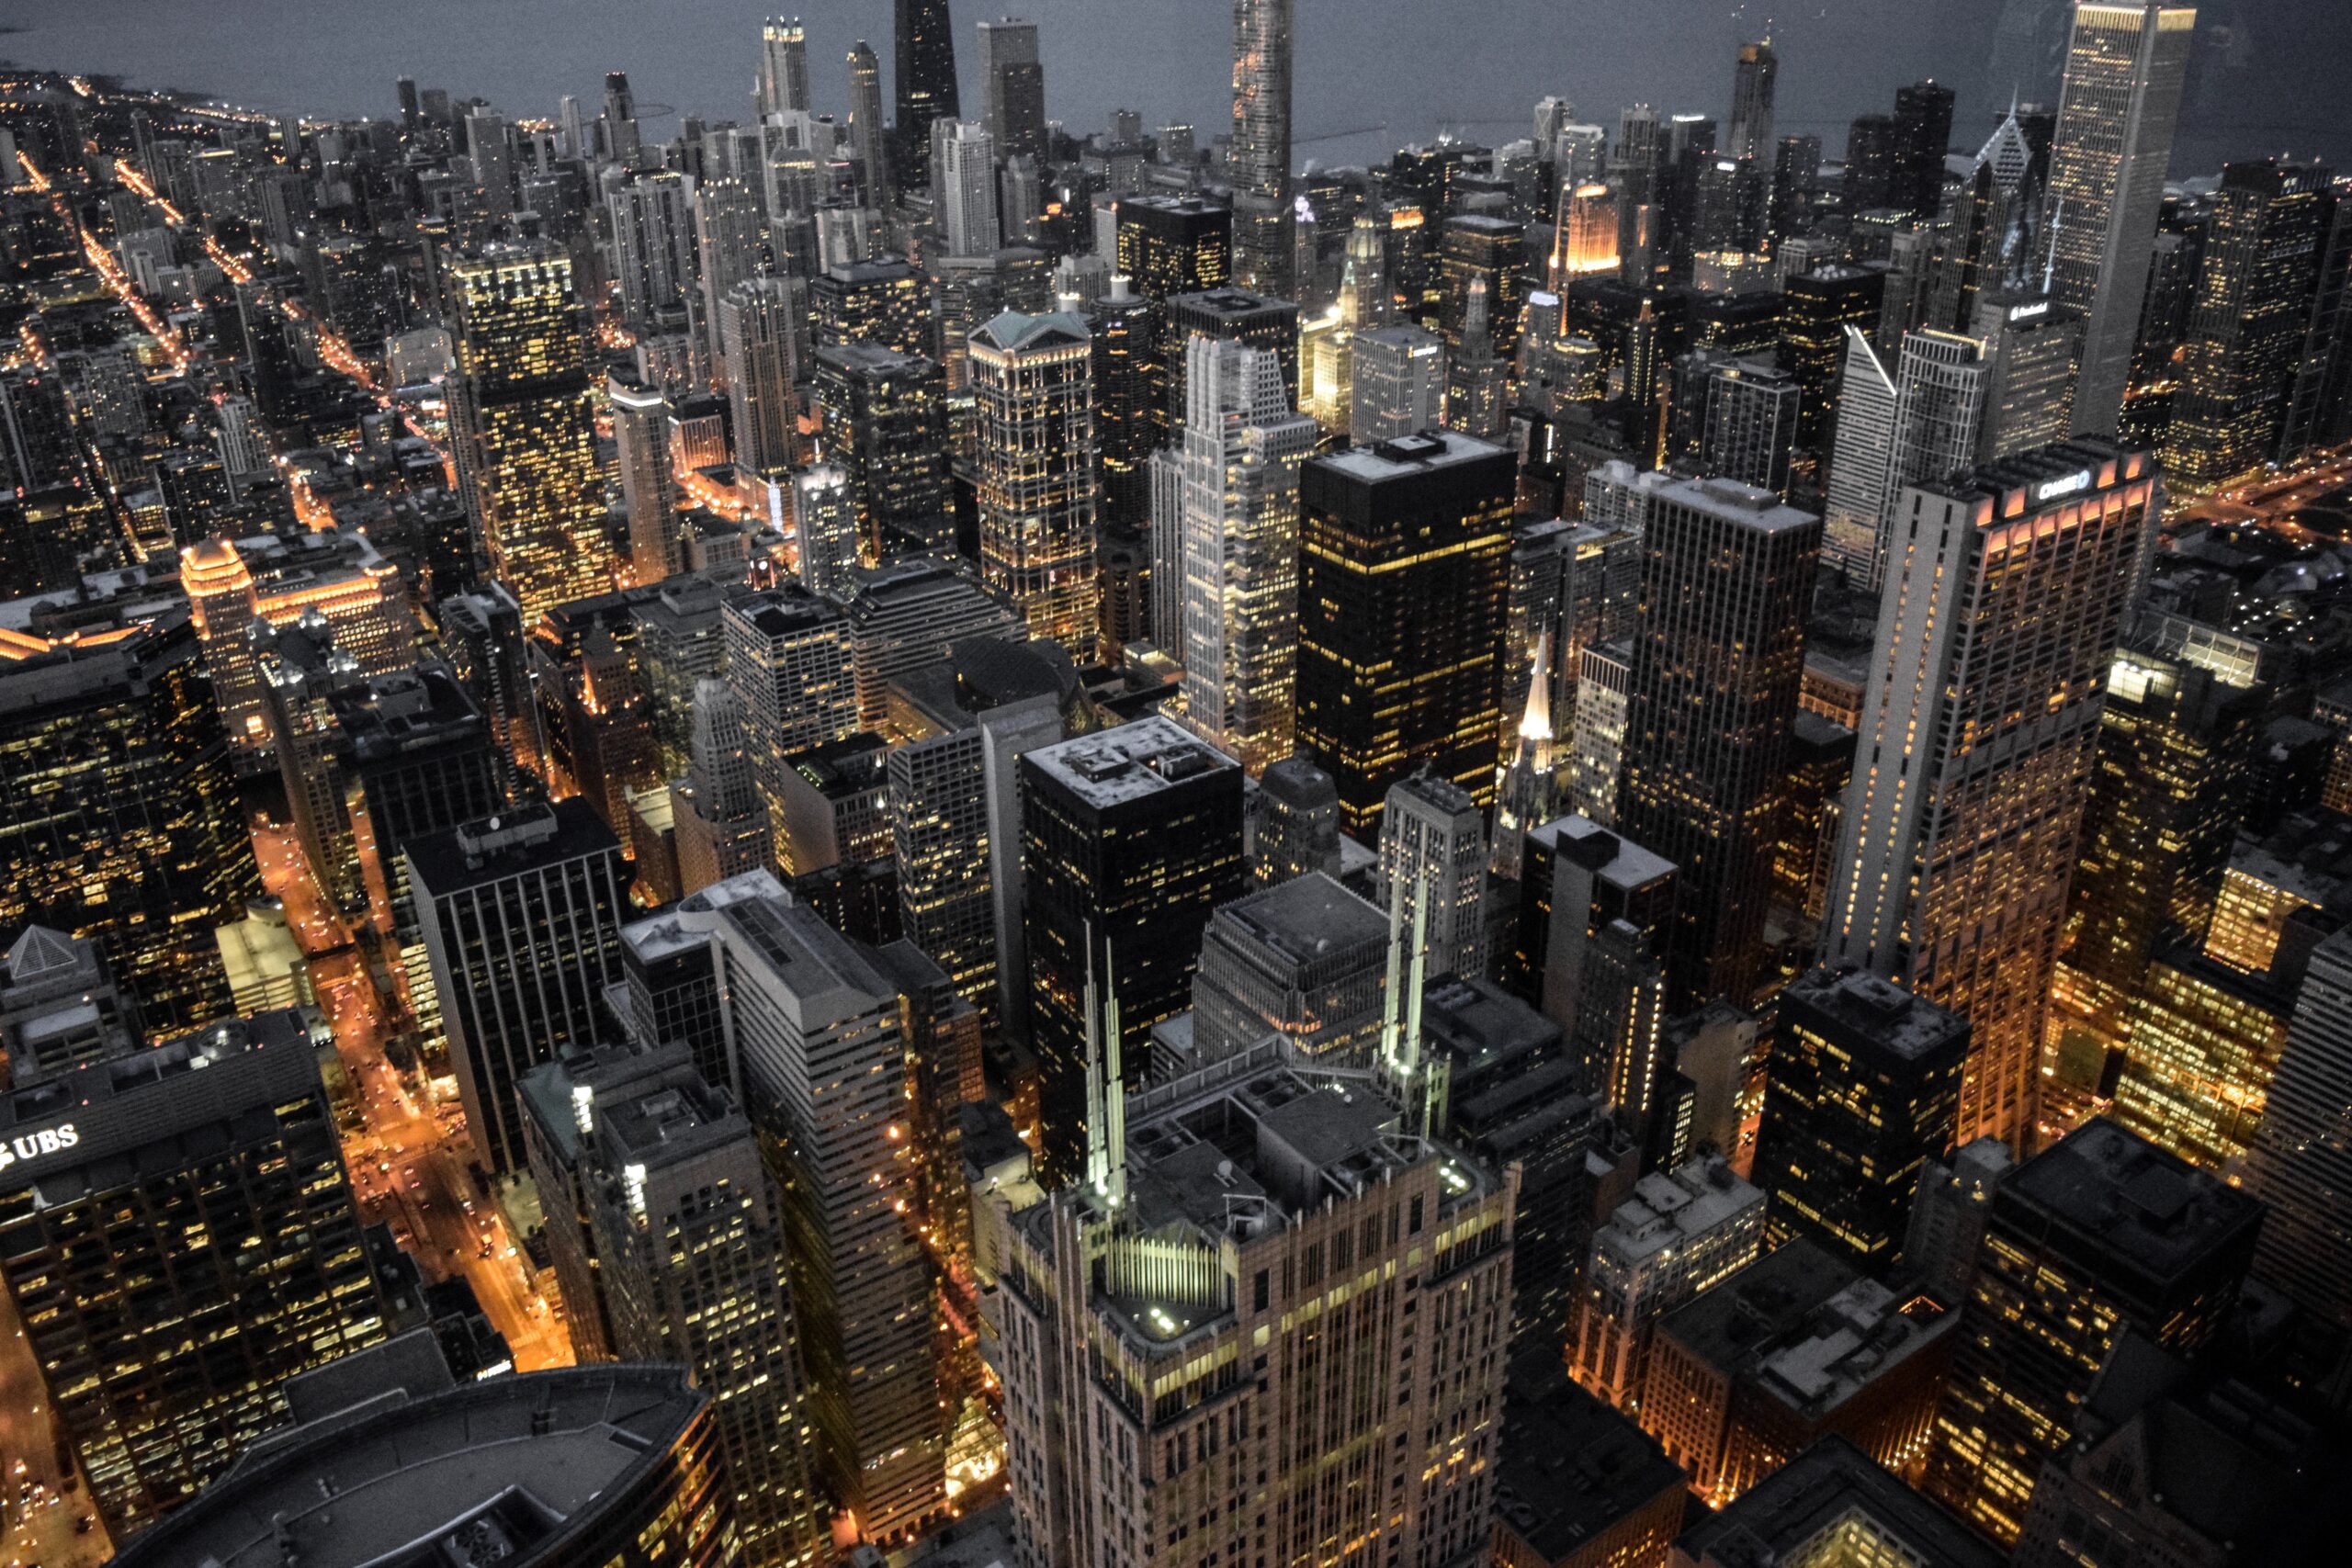 City of Chicago by night.